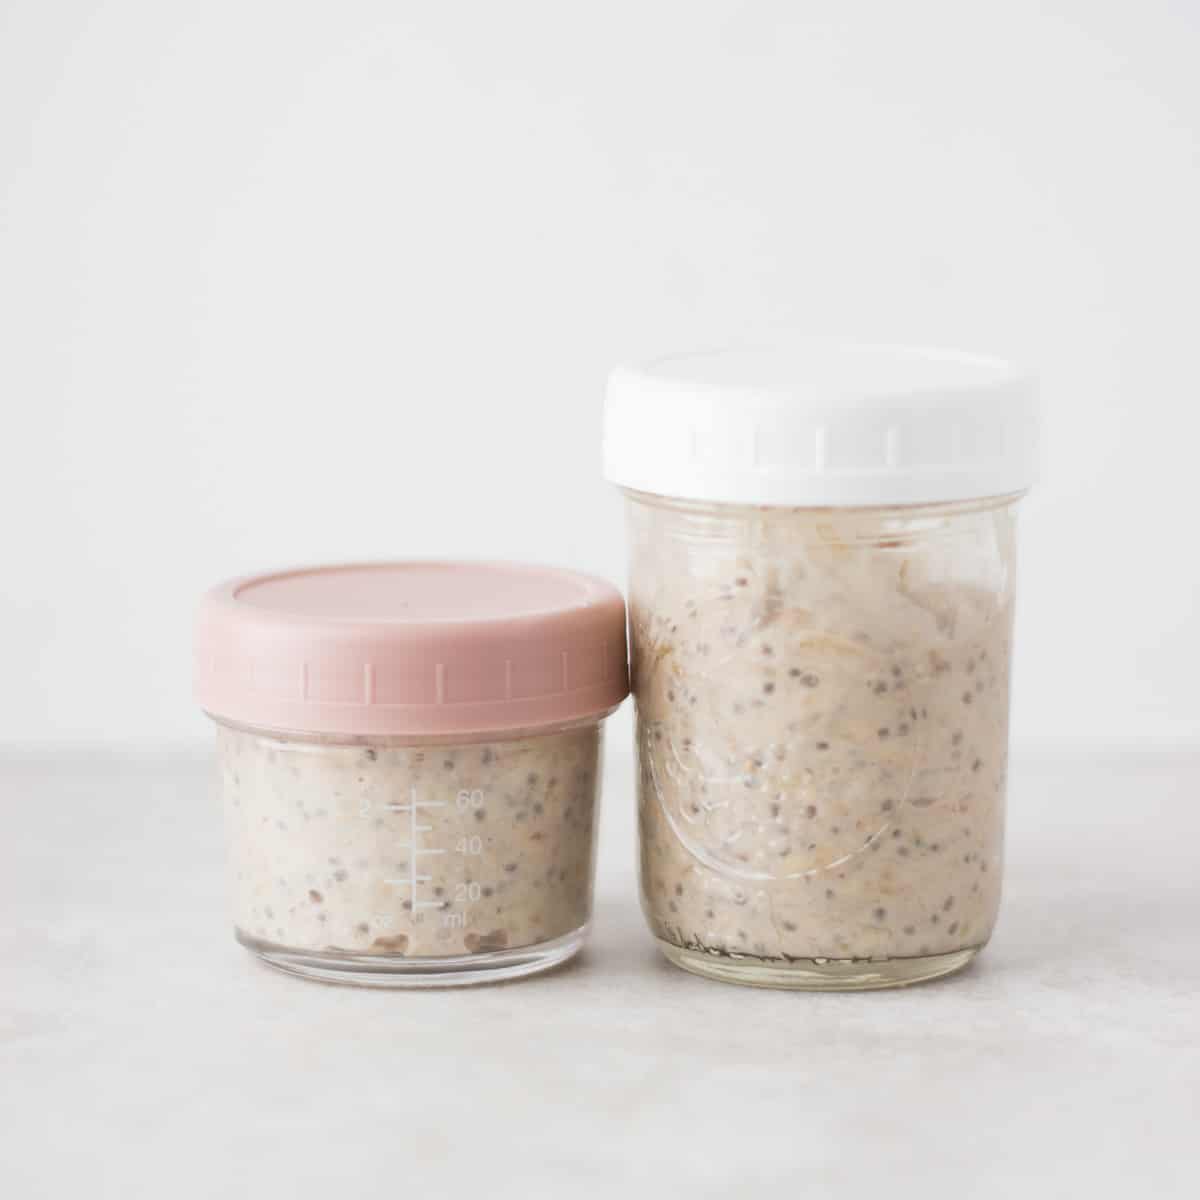 Two glass containers with overnight oats.